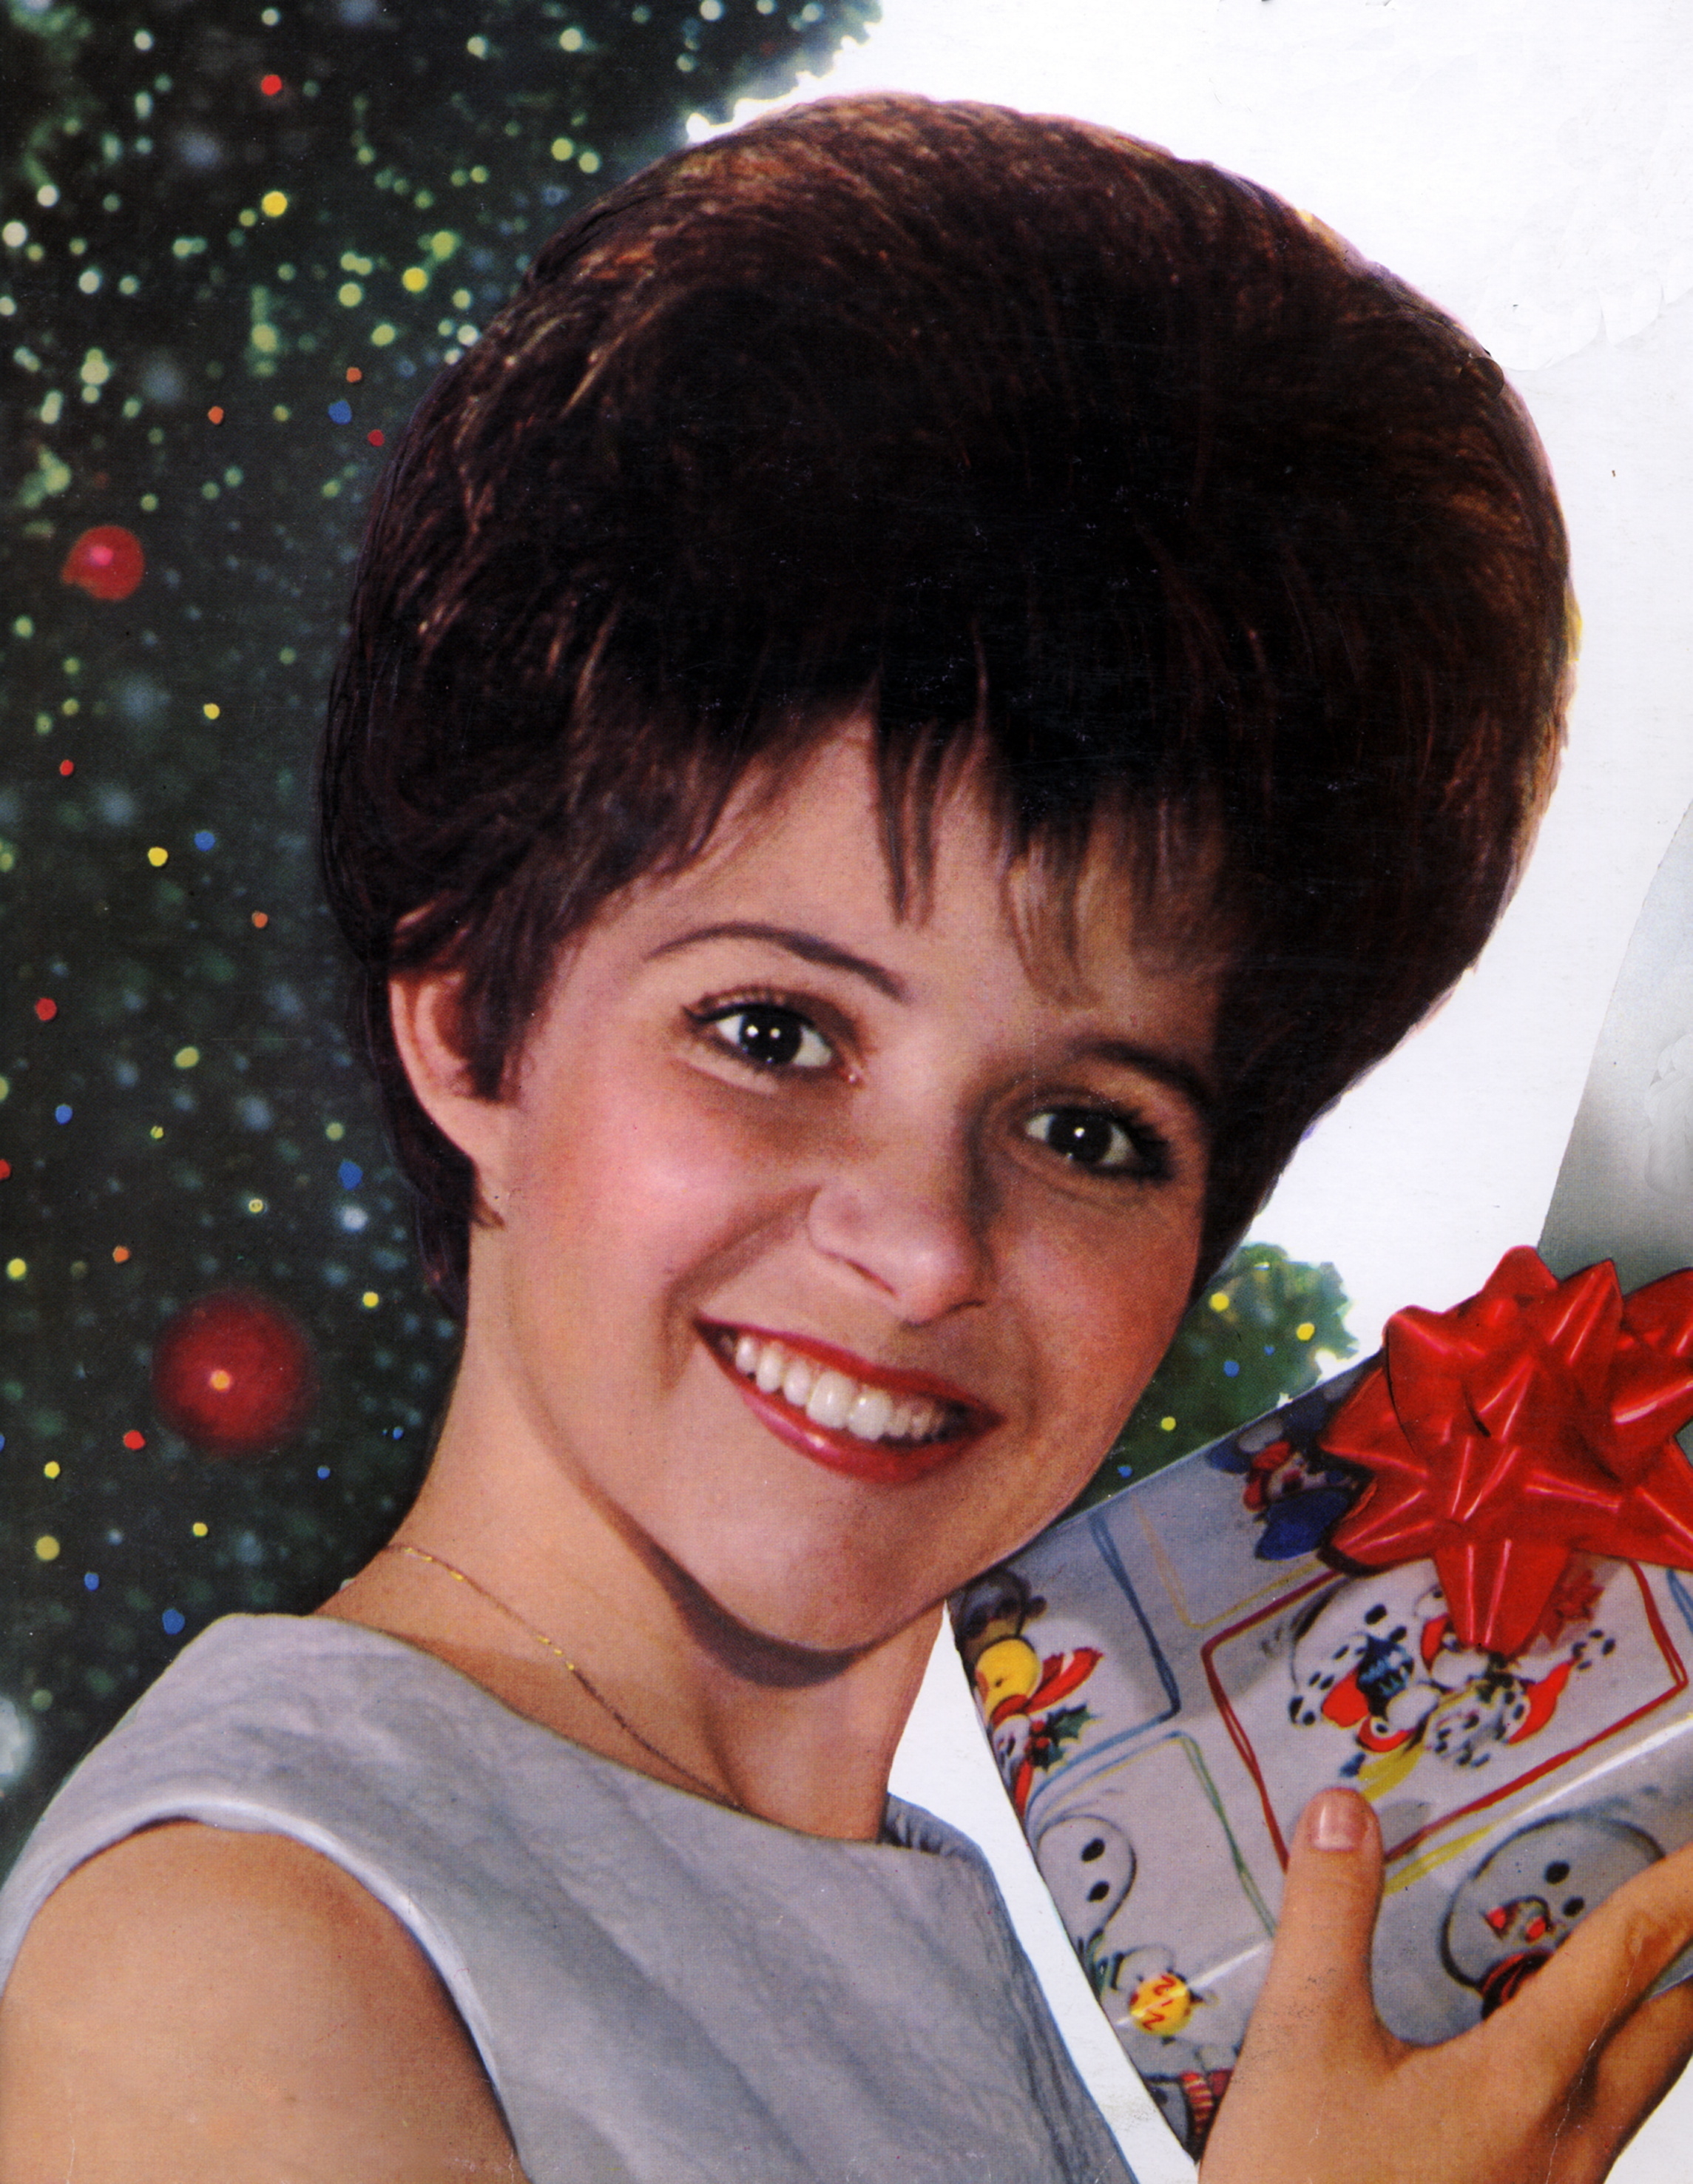 Close-up of a young Brenda smiling in front of a Christmas tree and holding a wrapped gift